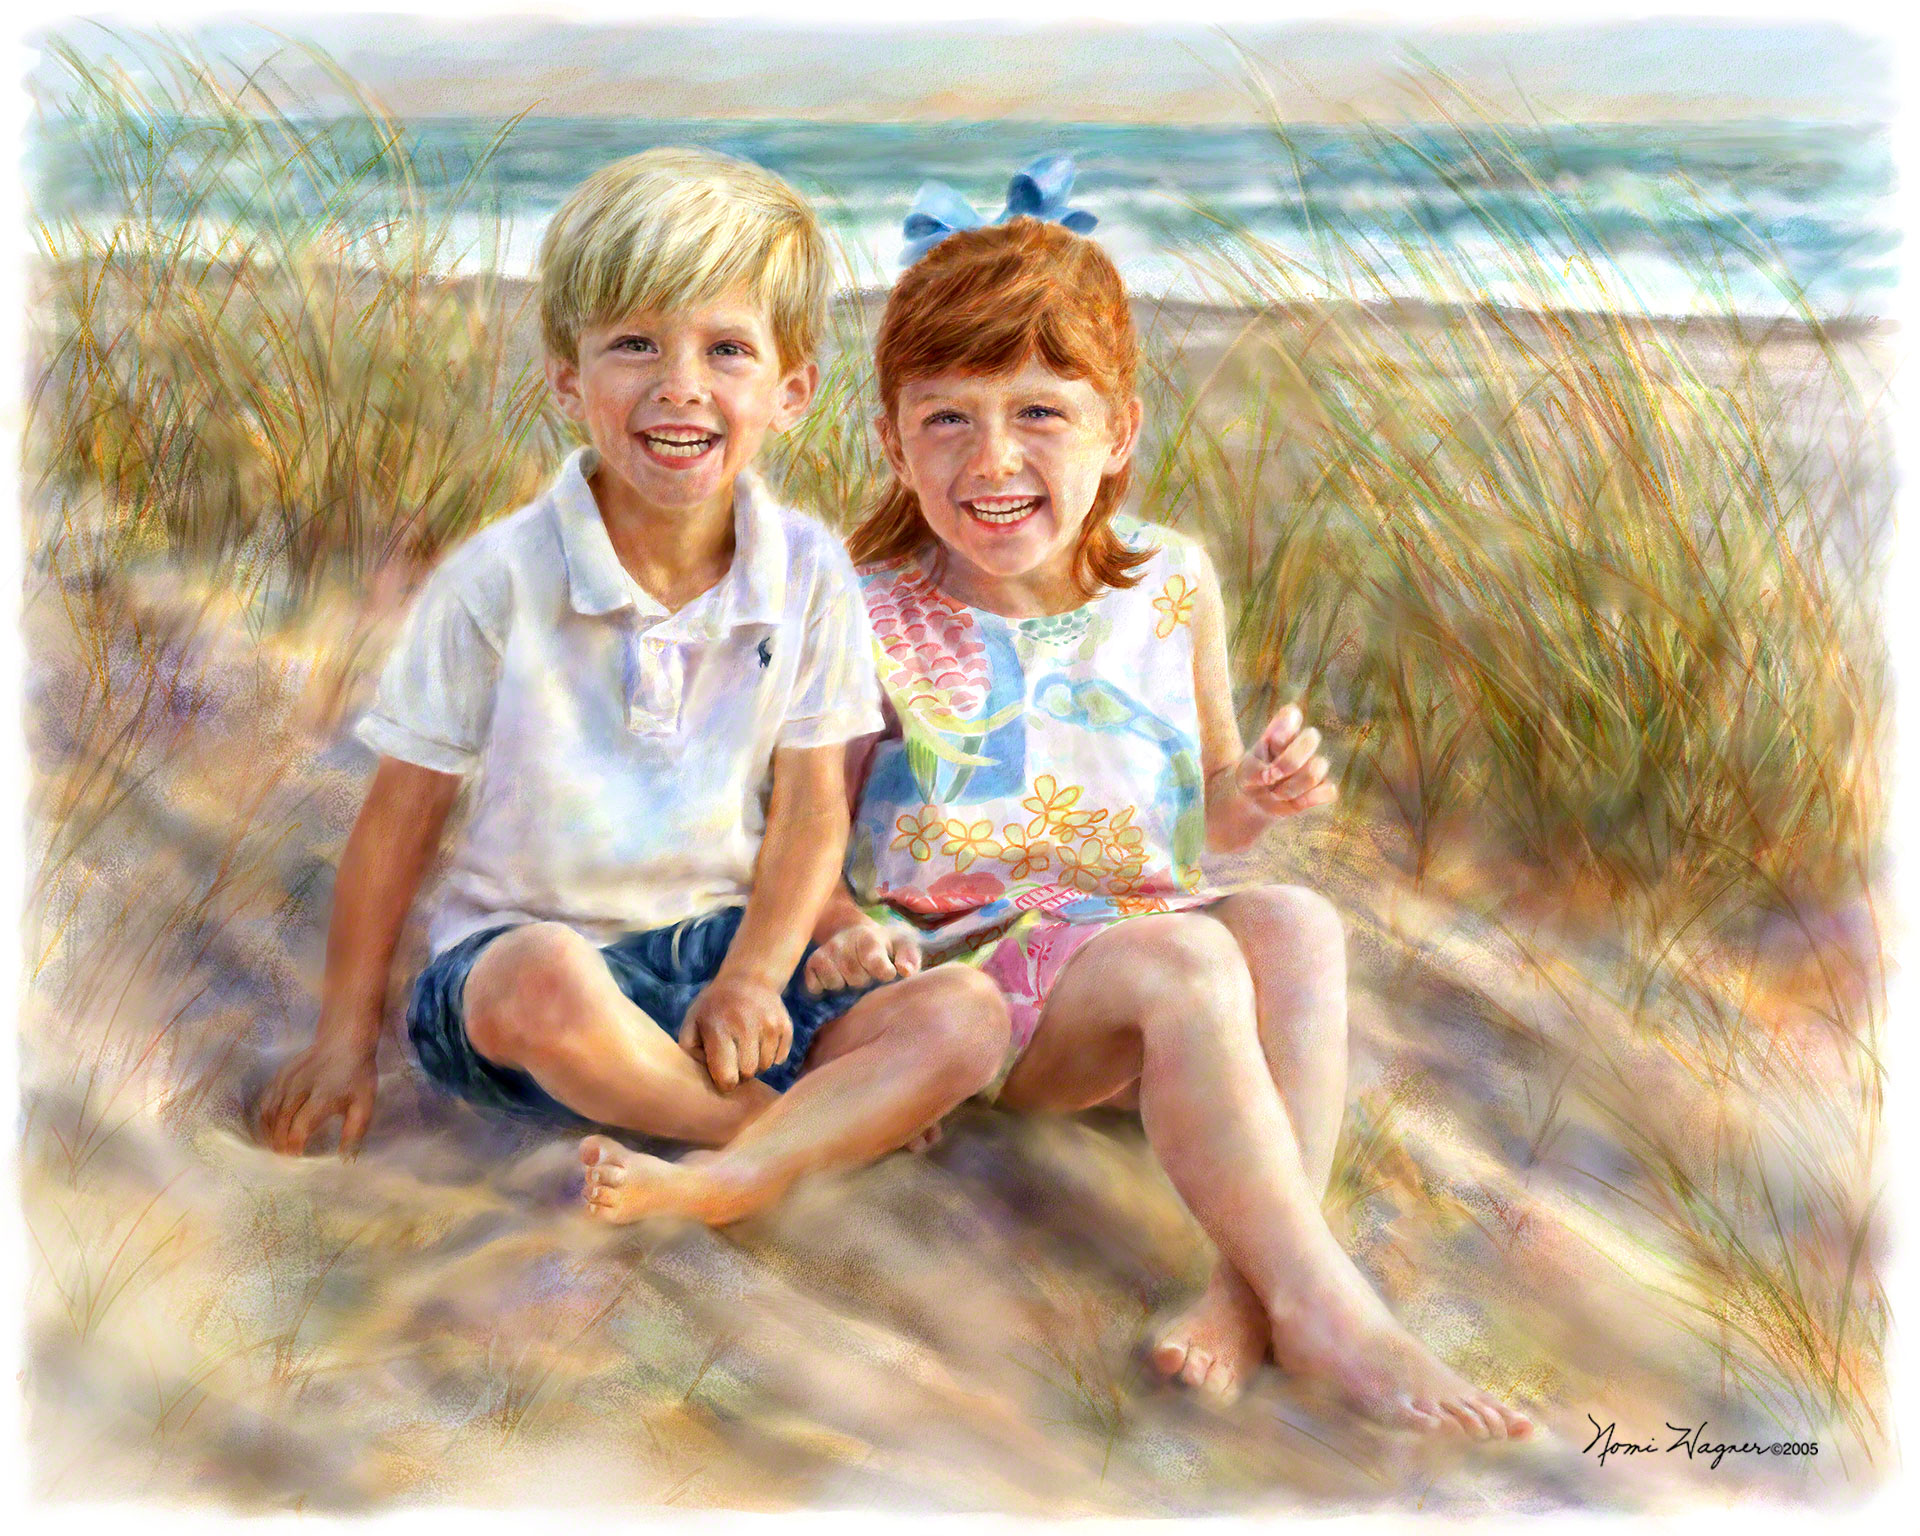 A testimonial from Nomi's client tells about this portrait painting of her children, sitting and laughing on the dunes at Mandalay Beach, CA.